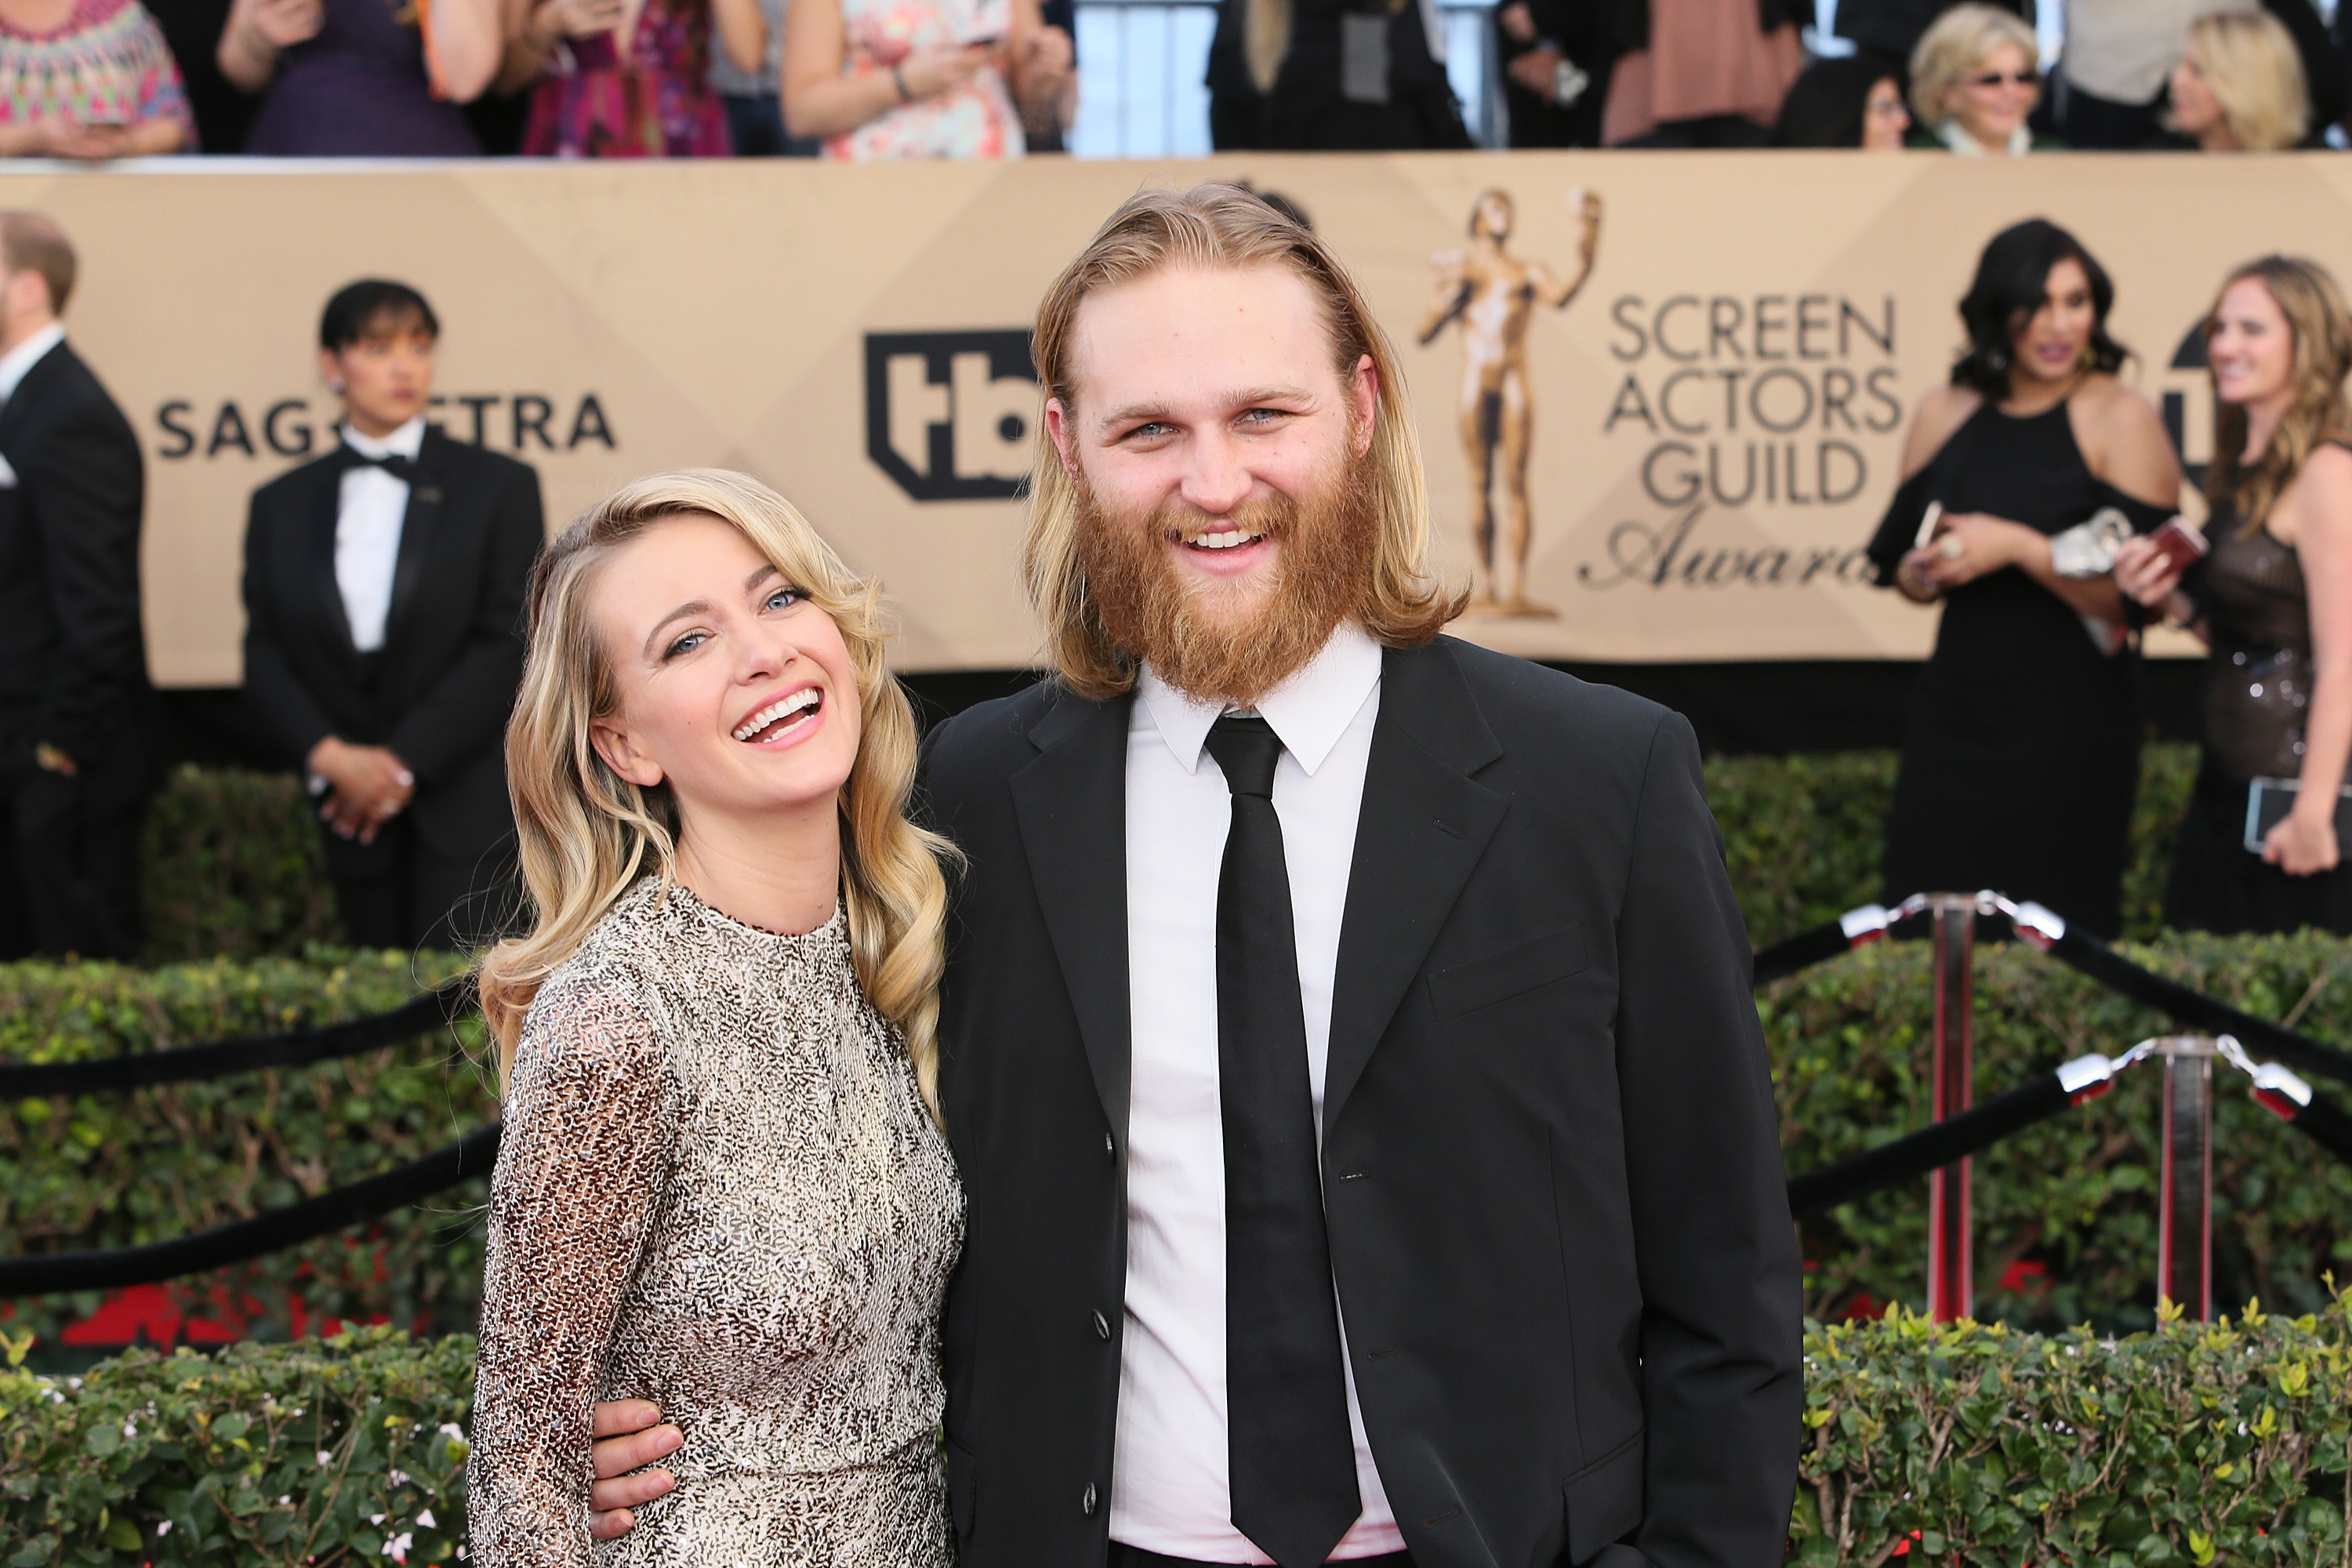 Meredith Hagner and Wyatt Russell attend the 23rd Annual Screen Actors Guild Awards in Los Angeles, California on January 29, 2017 | Source: Getty Images